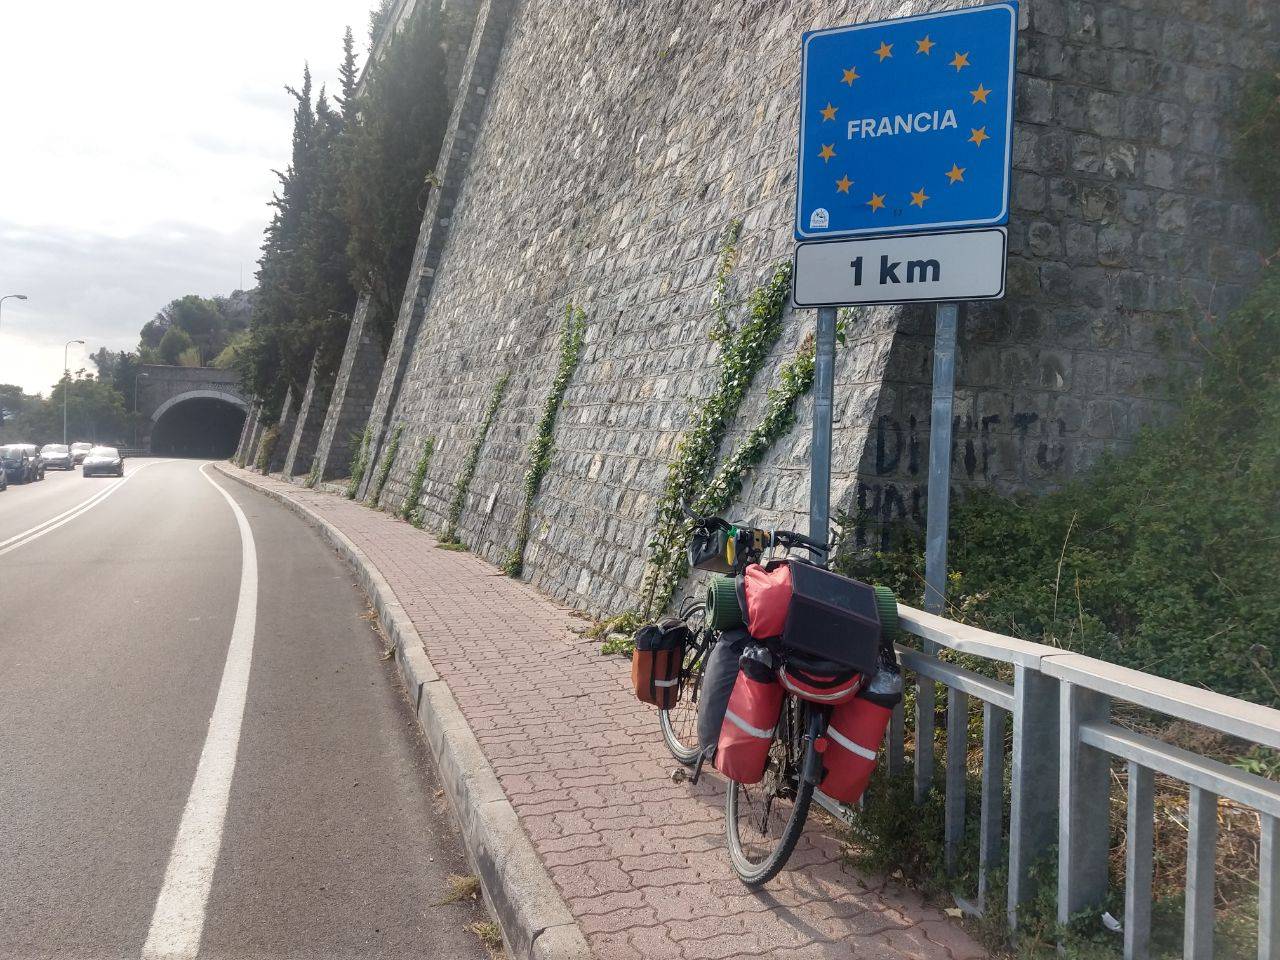 Imperia, Monaco and Nice - day 34 of cycling from Ukraine to Portugal